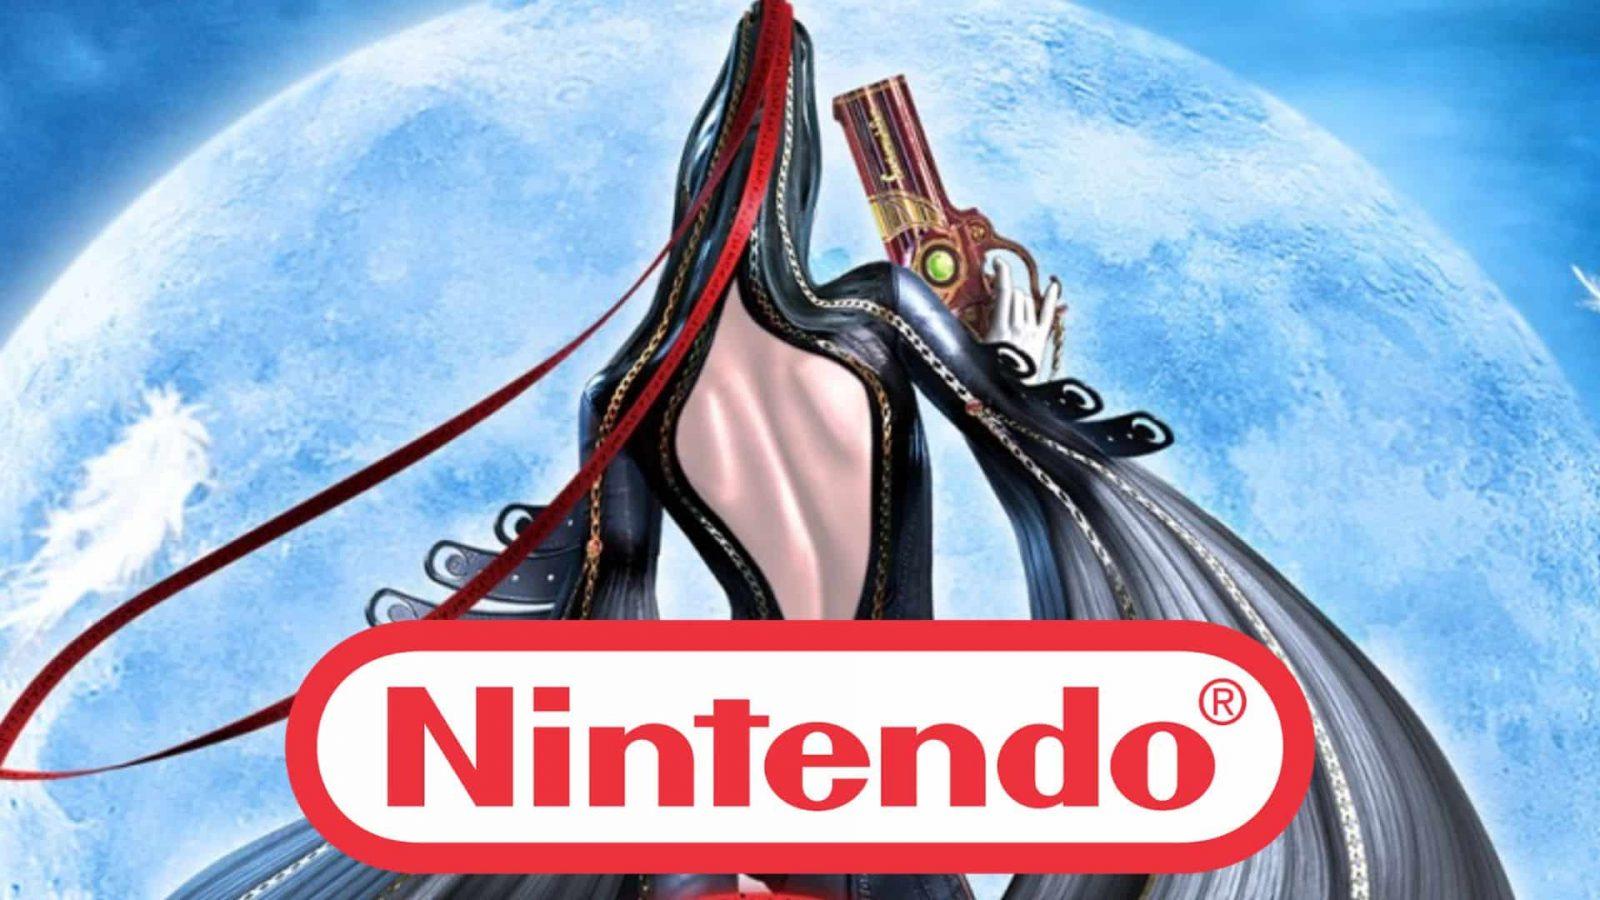 Bayonetta 3 Includes a Nudity Censoring Mode For The Kids